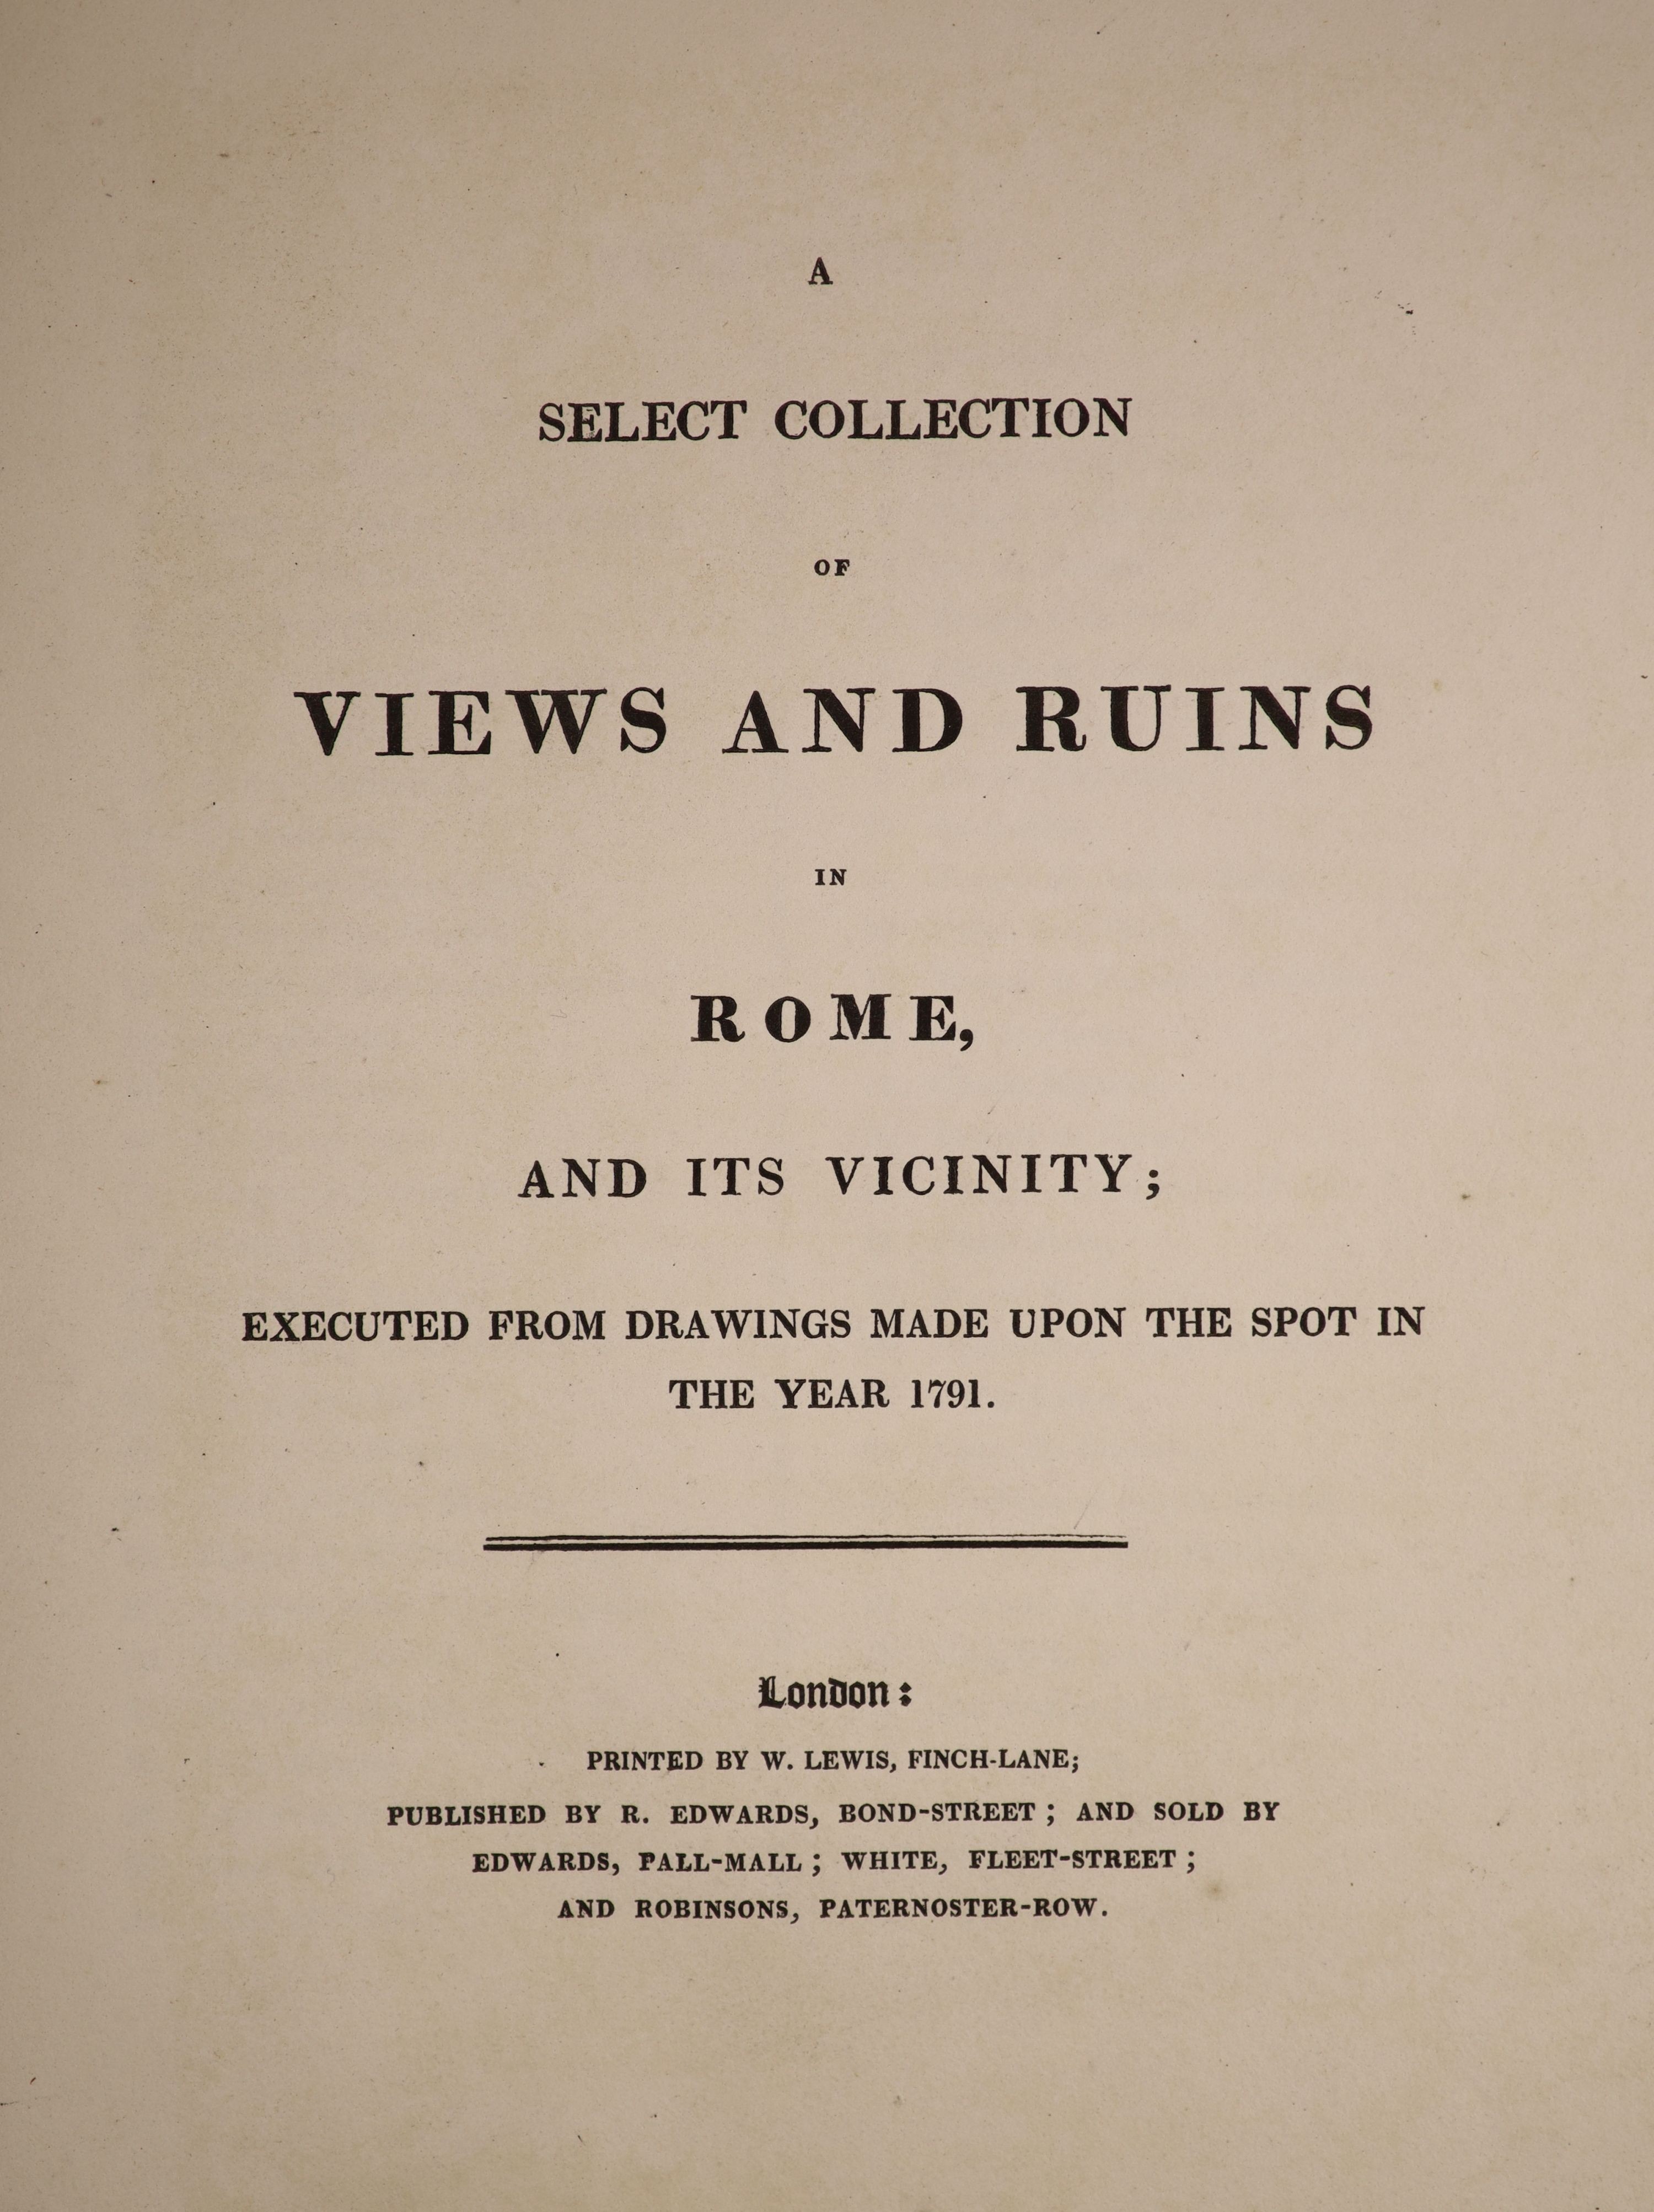 Merigot, James - A Select Collection of Views and Ruins in Rome, and Its Vicinity; Executed from Drawings Made Upon the Spot in the year 1791, first edition, folio, large paper copy, 2 parts in 1 vol, half calf, with fro